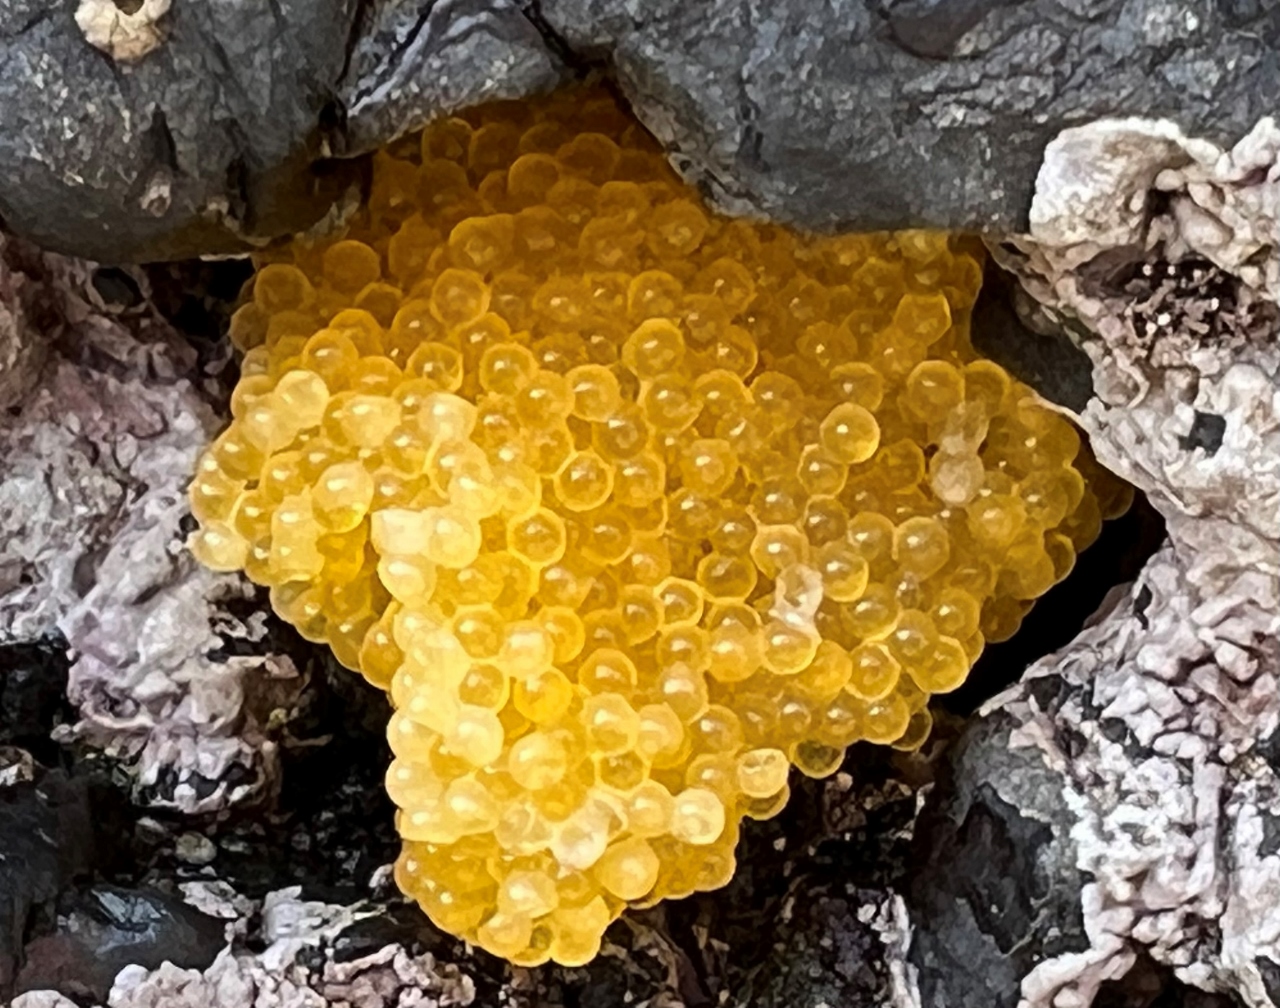 Look at these beautiful golden fish eggs, the eggs of a Plainfin